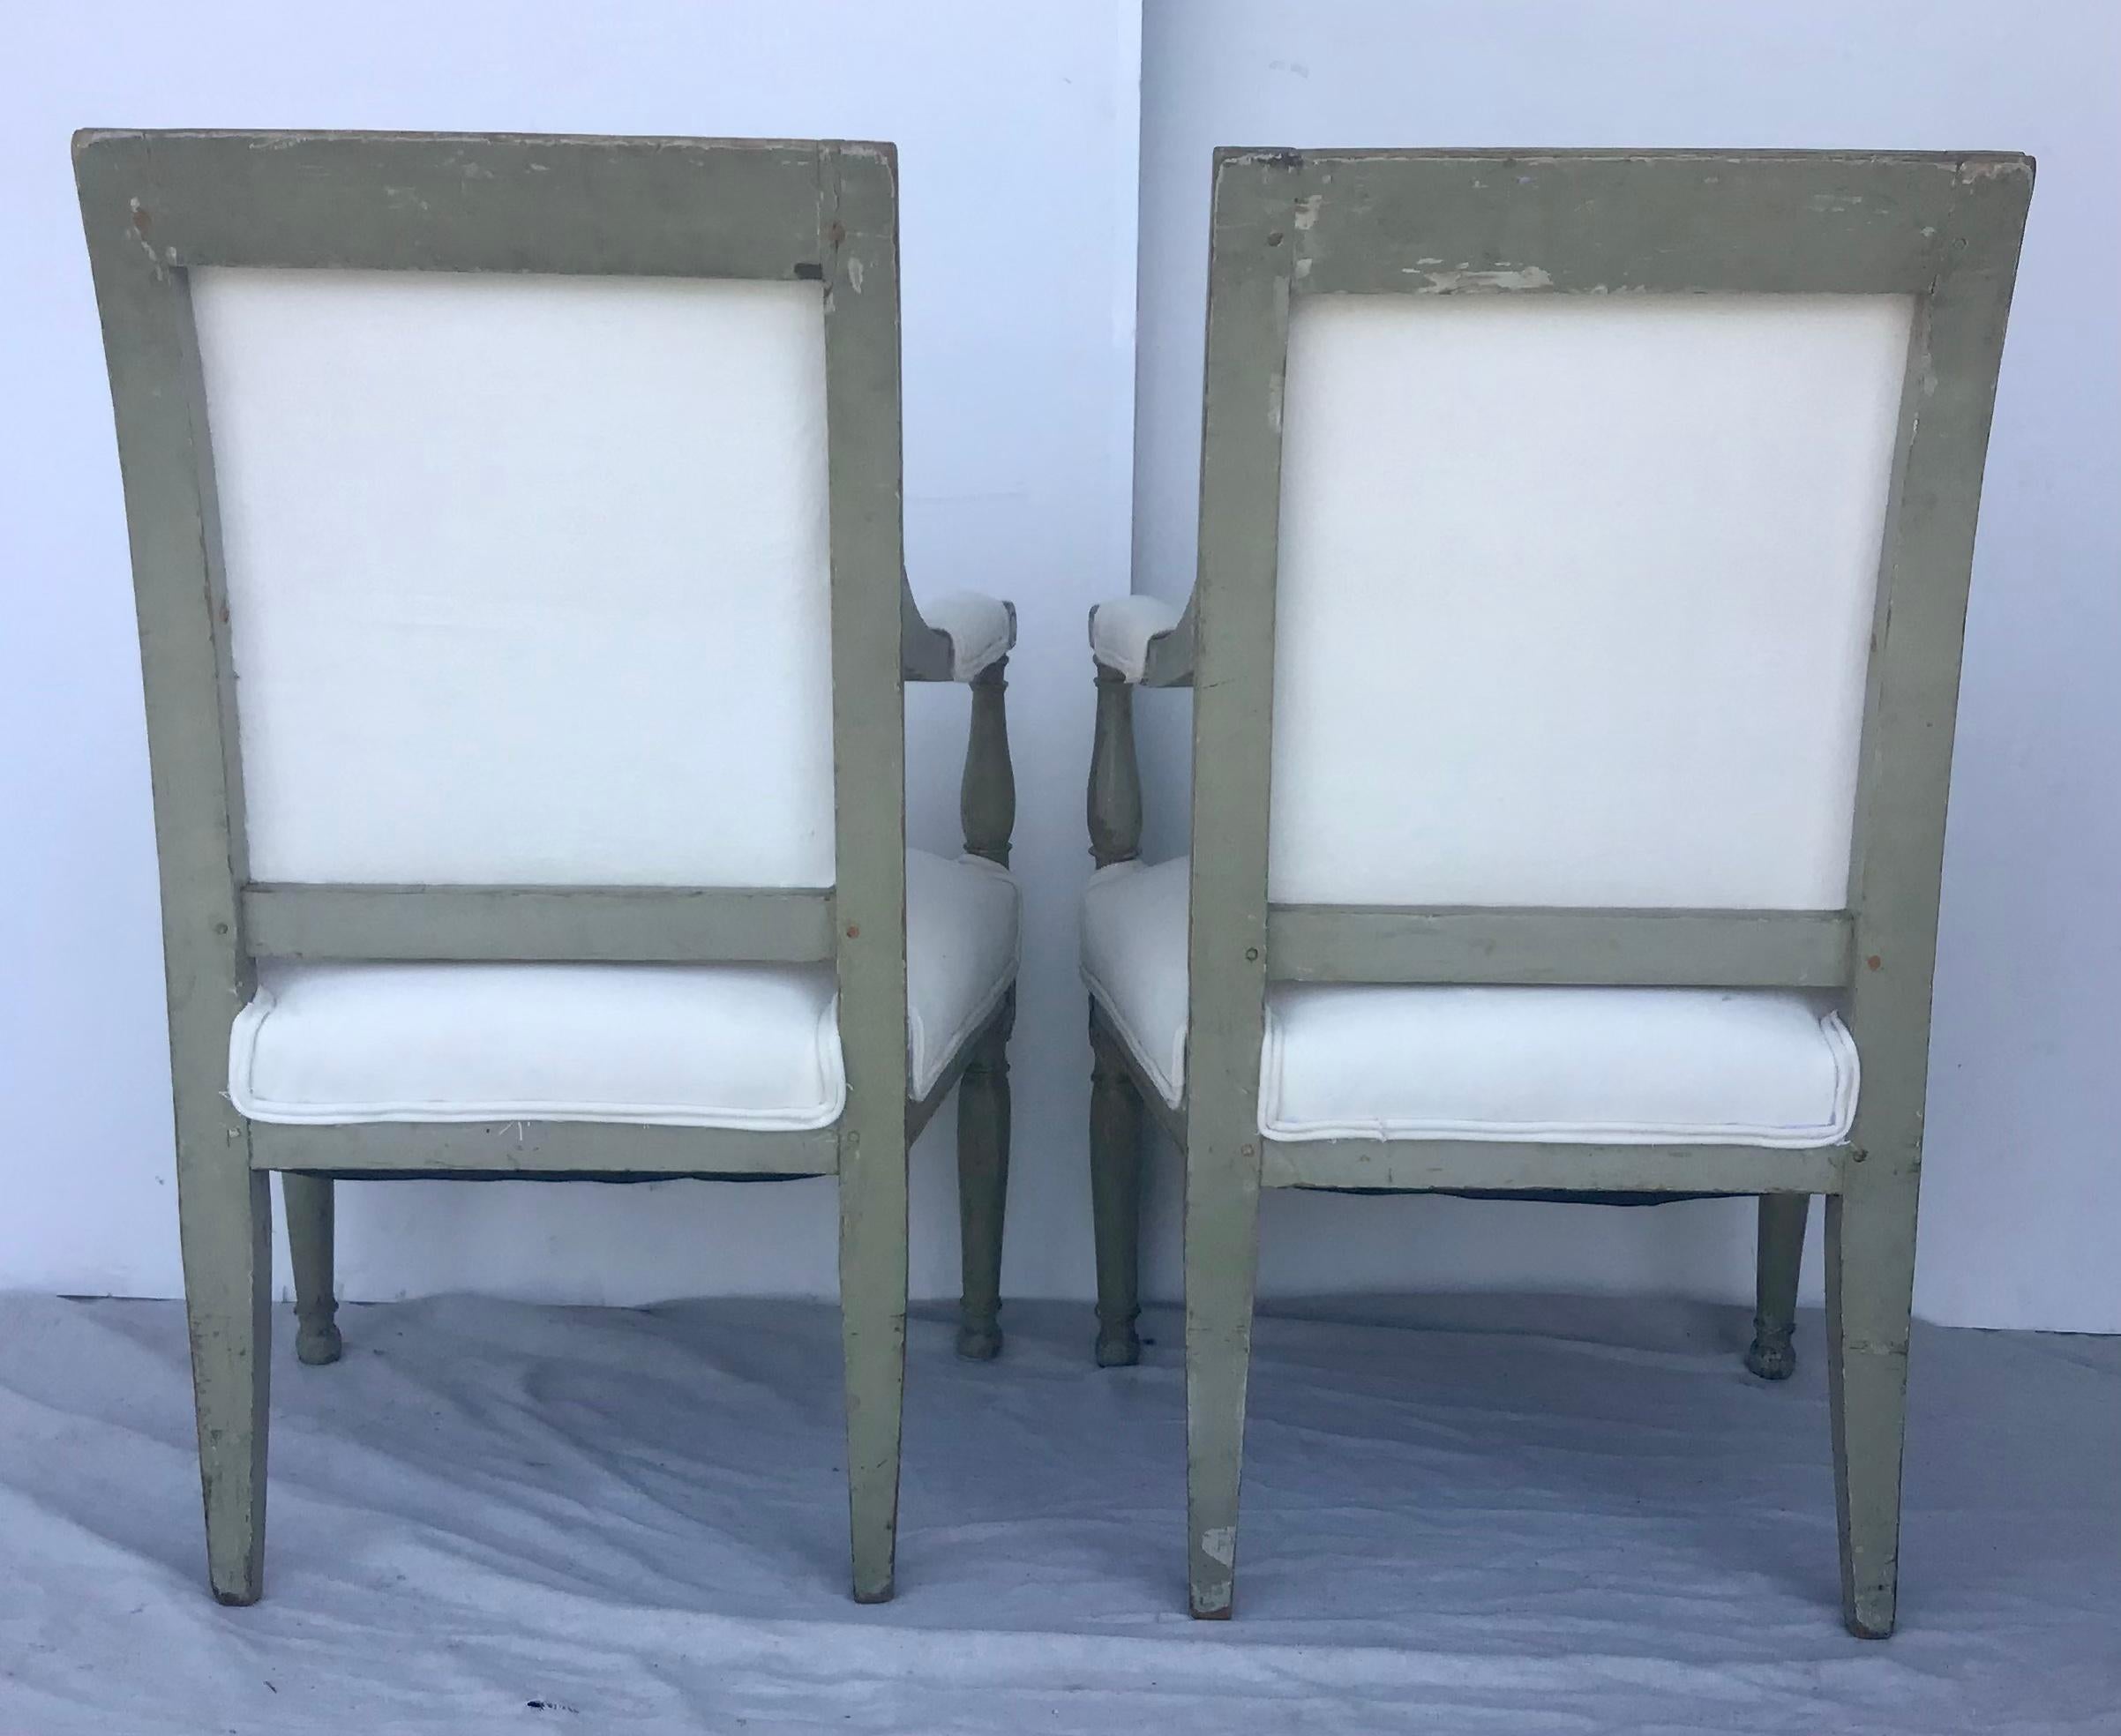 Beautiful pair of French original Directoire - Louis XVI chairs, France, 18th century. Original painted French Greenish gray with blue accents. All pegged construction, these came out of a Palm Beach estate and are solid and sturdy with a wonderful